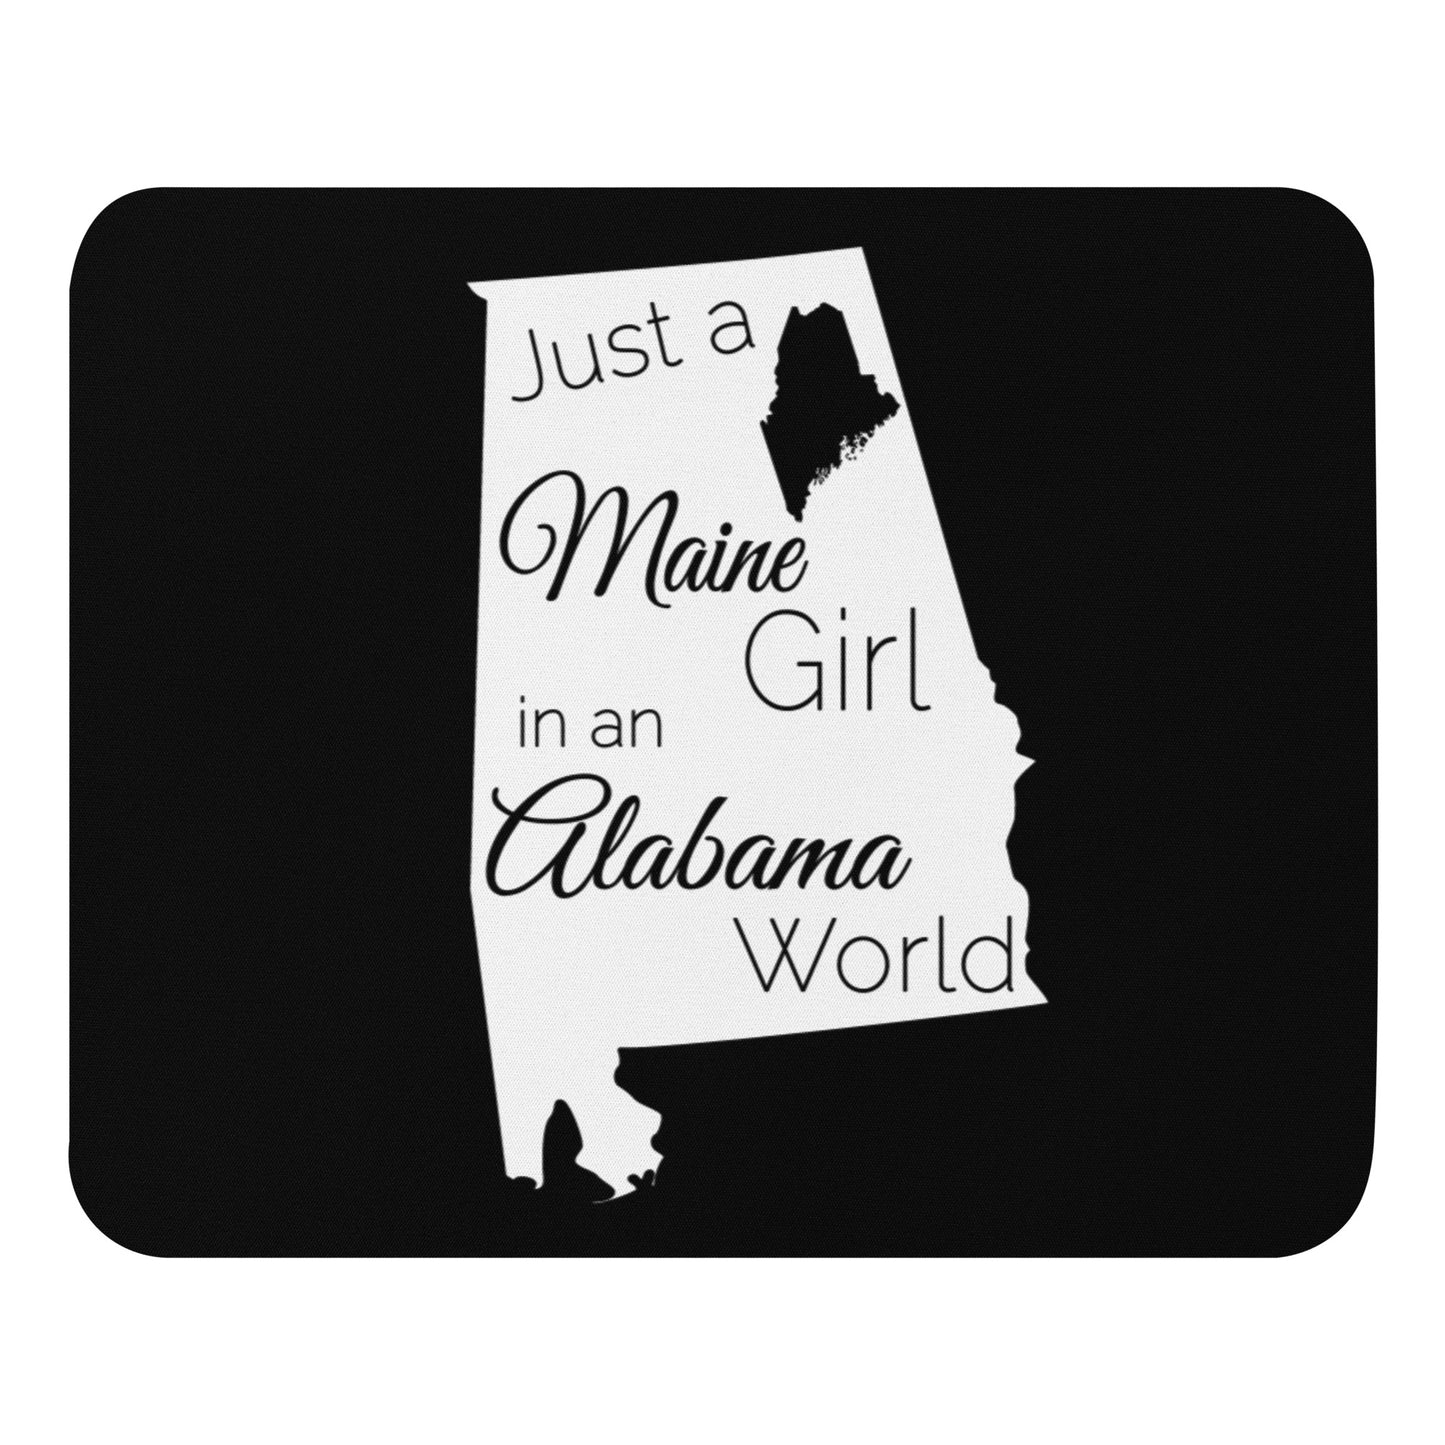 Just a Maine Girl in an Alabama World Mouse pad